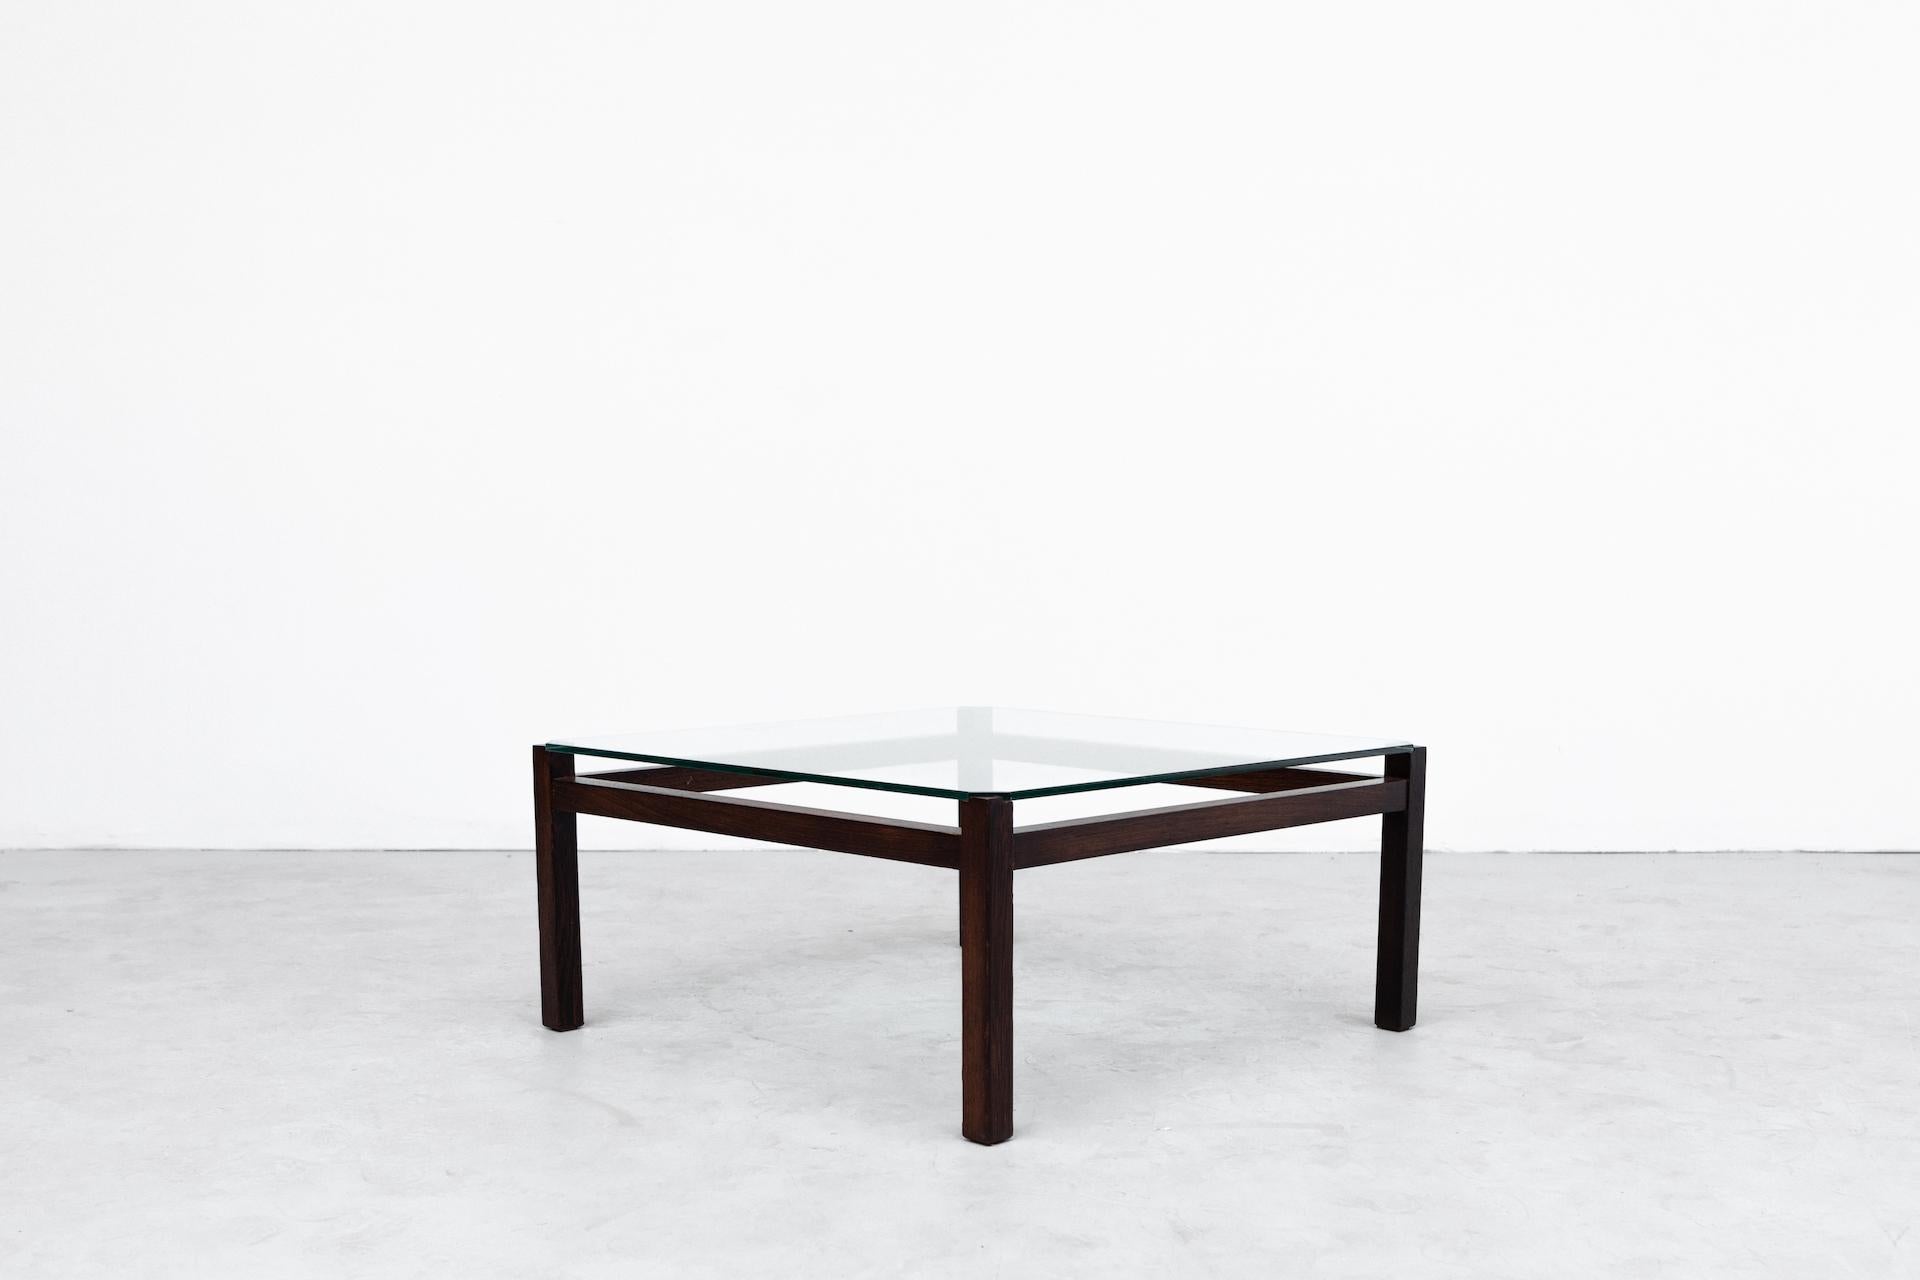 Mid-Century Modern 'Langerak' Wenge Wood and Glass Coffee Table by Kho Liang Ie for 'T Spectrum